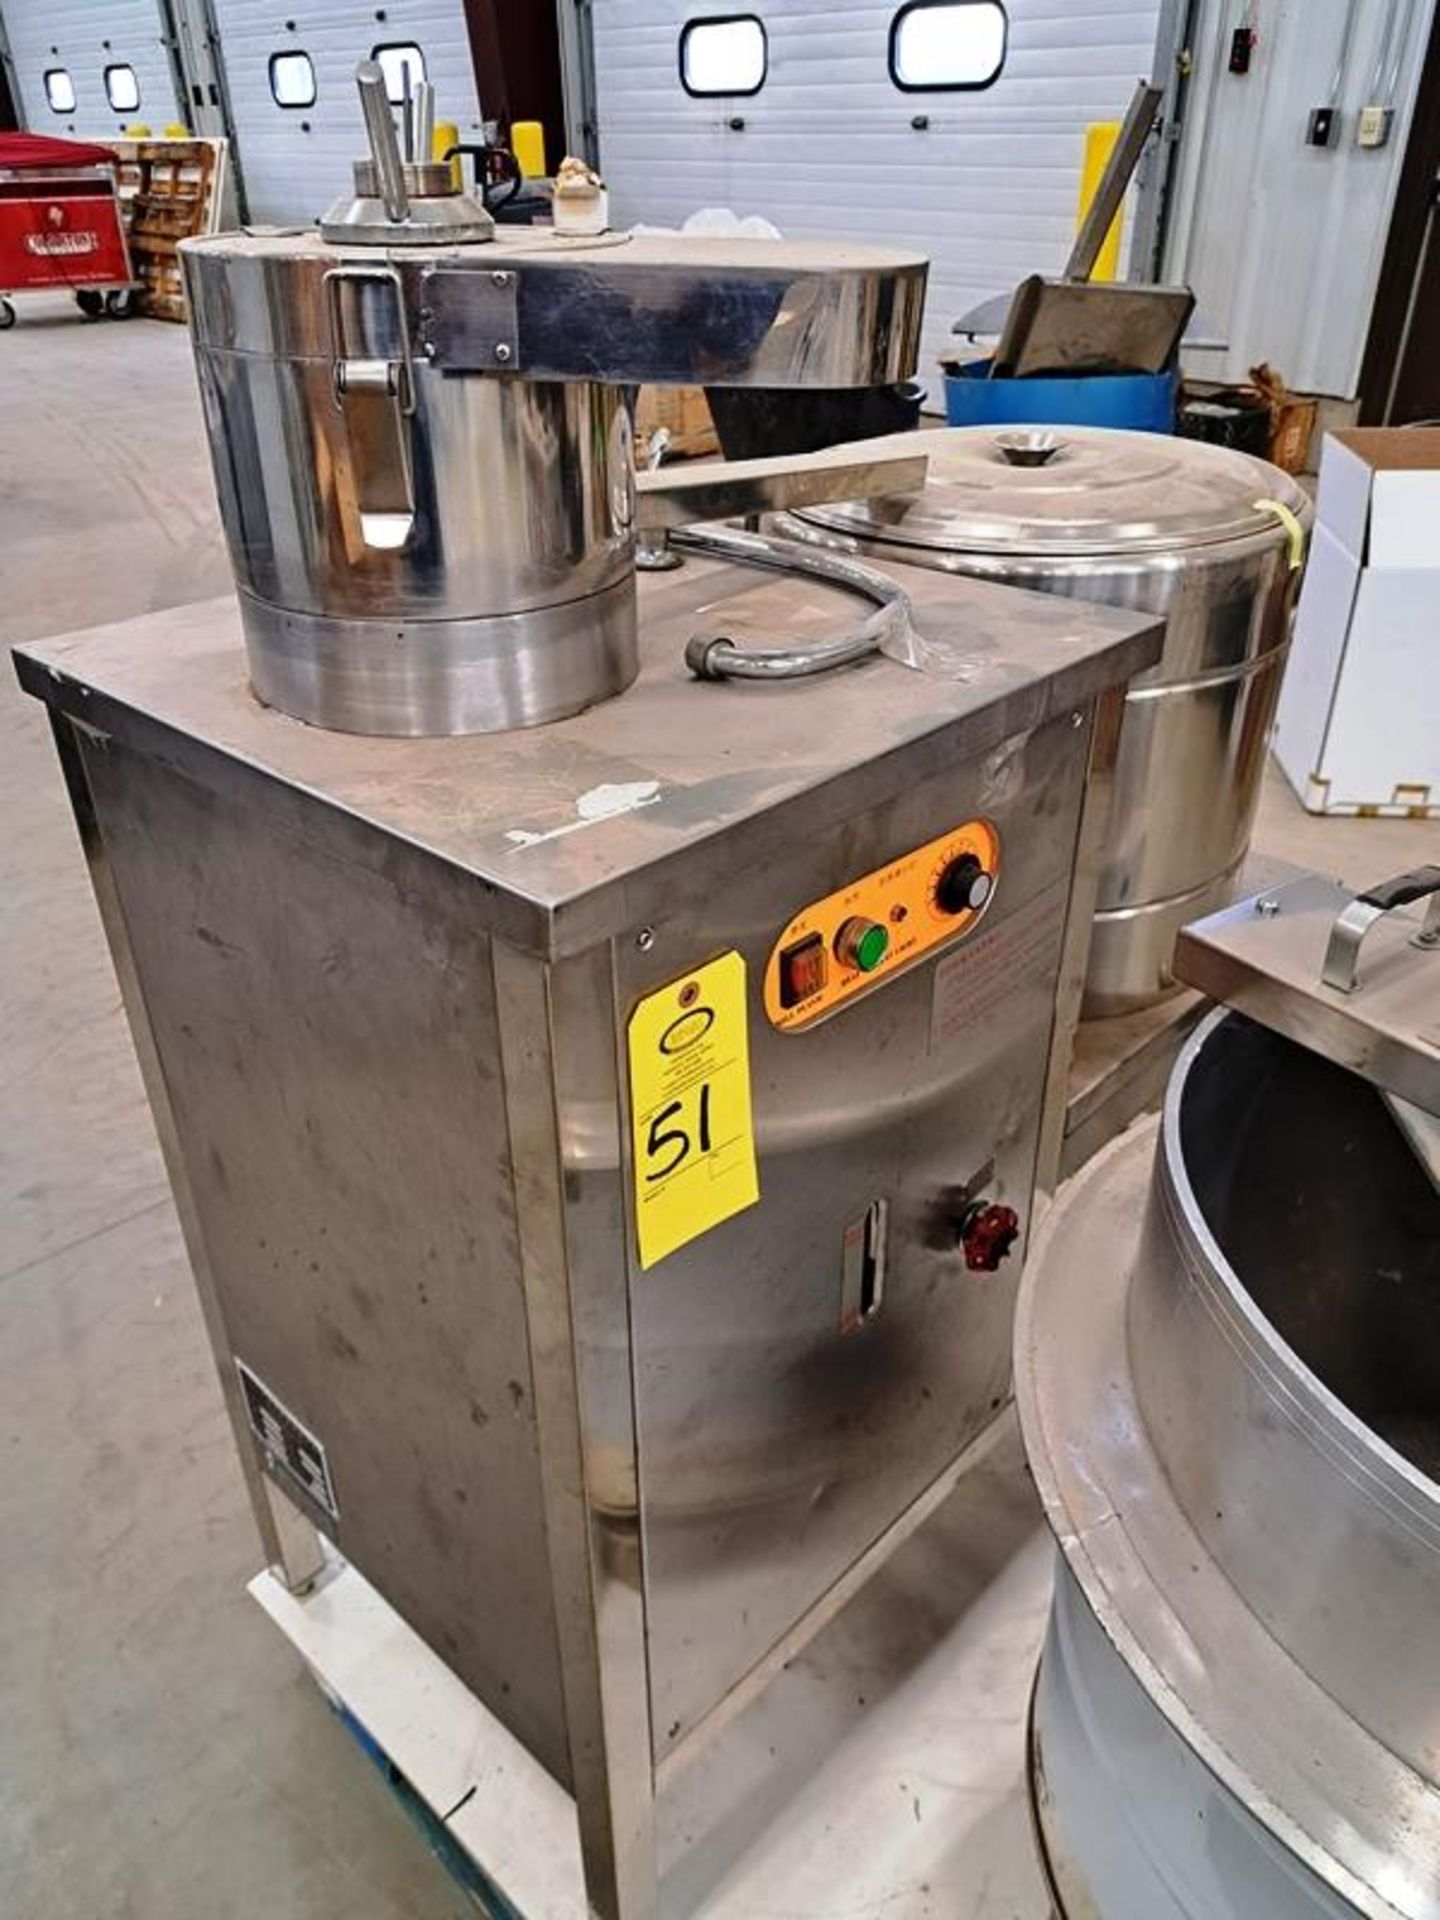 Toni Mdl. FT-10 Stainless Steel Electrothermal Soy Milk Machine (Required Loading Fee: $25.00) NO